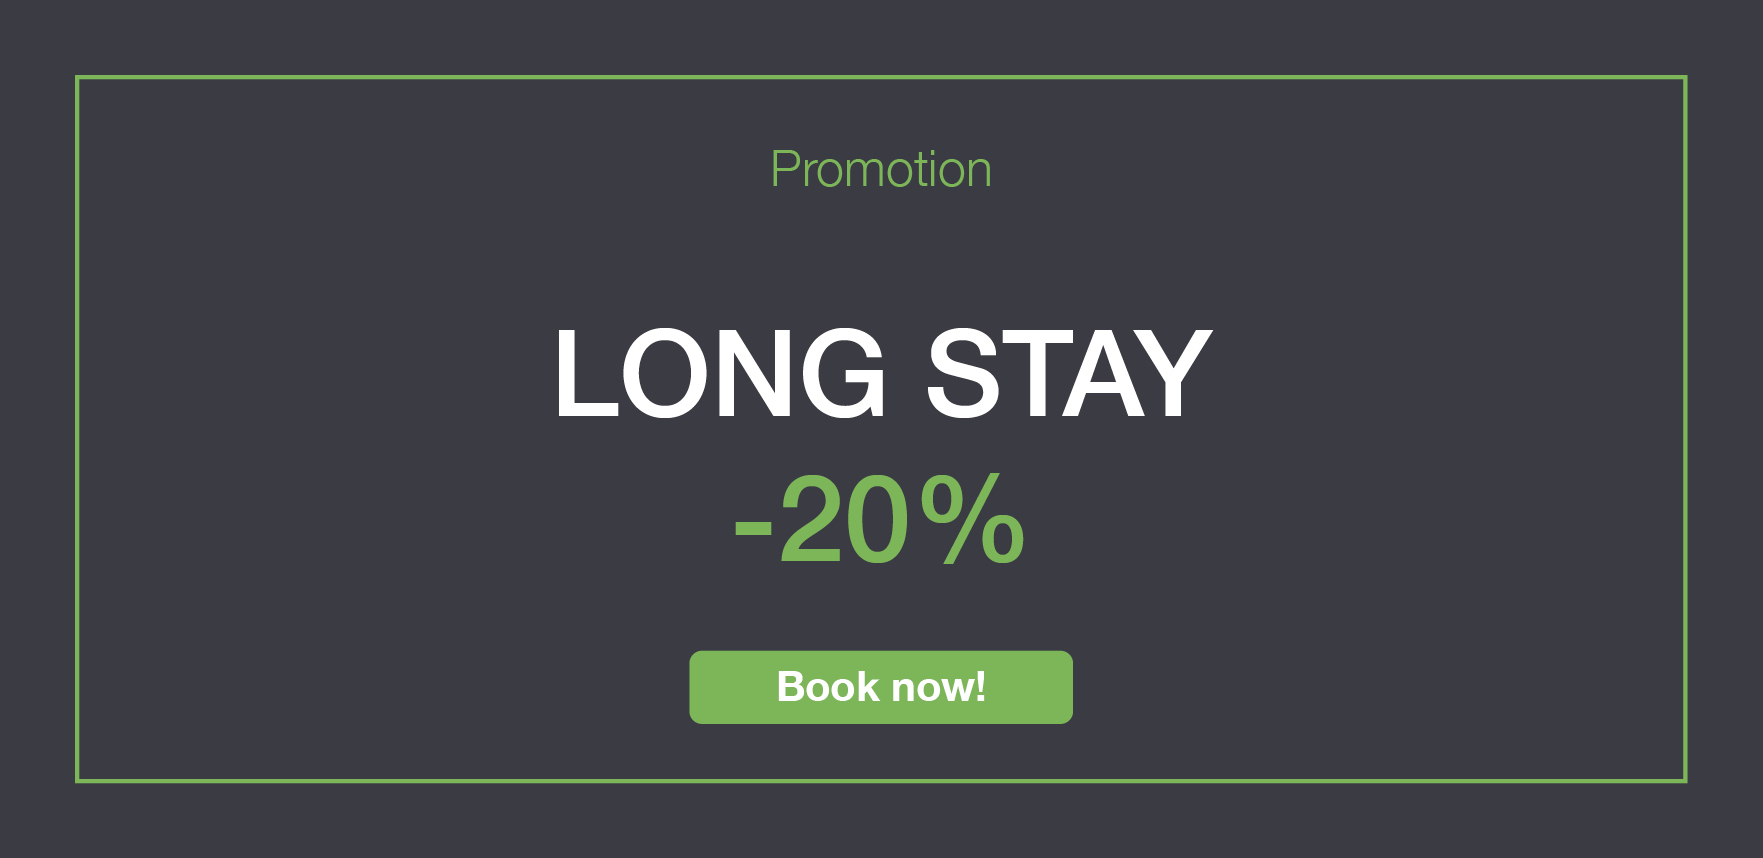 LONG STAY PROMOTION